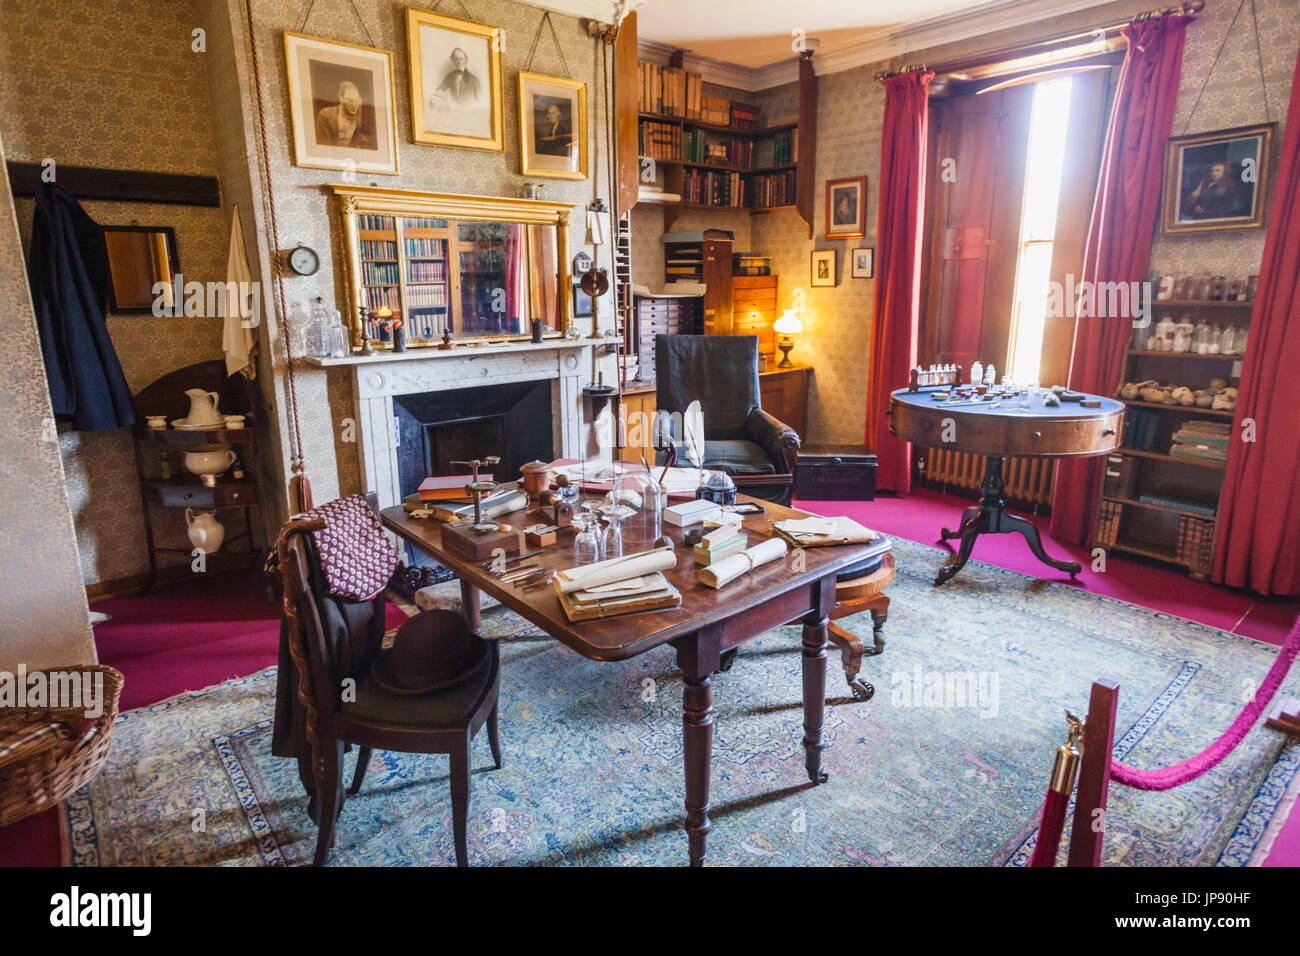 England, Greater London, Kent, Downe, Down House, The Home of Charles Darwin, The Study Stock Photo